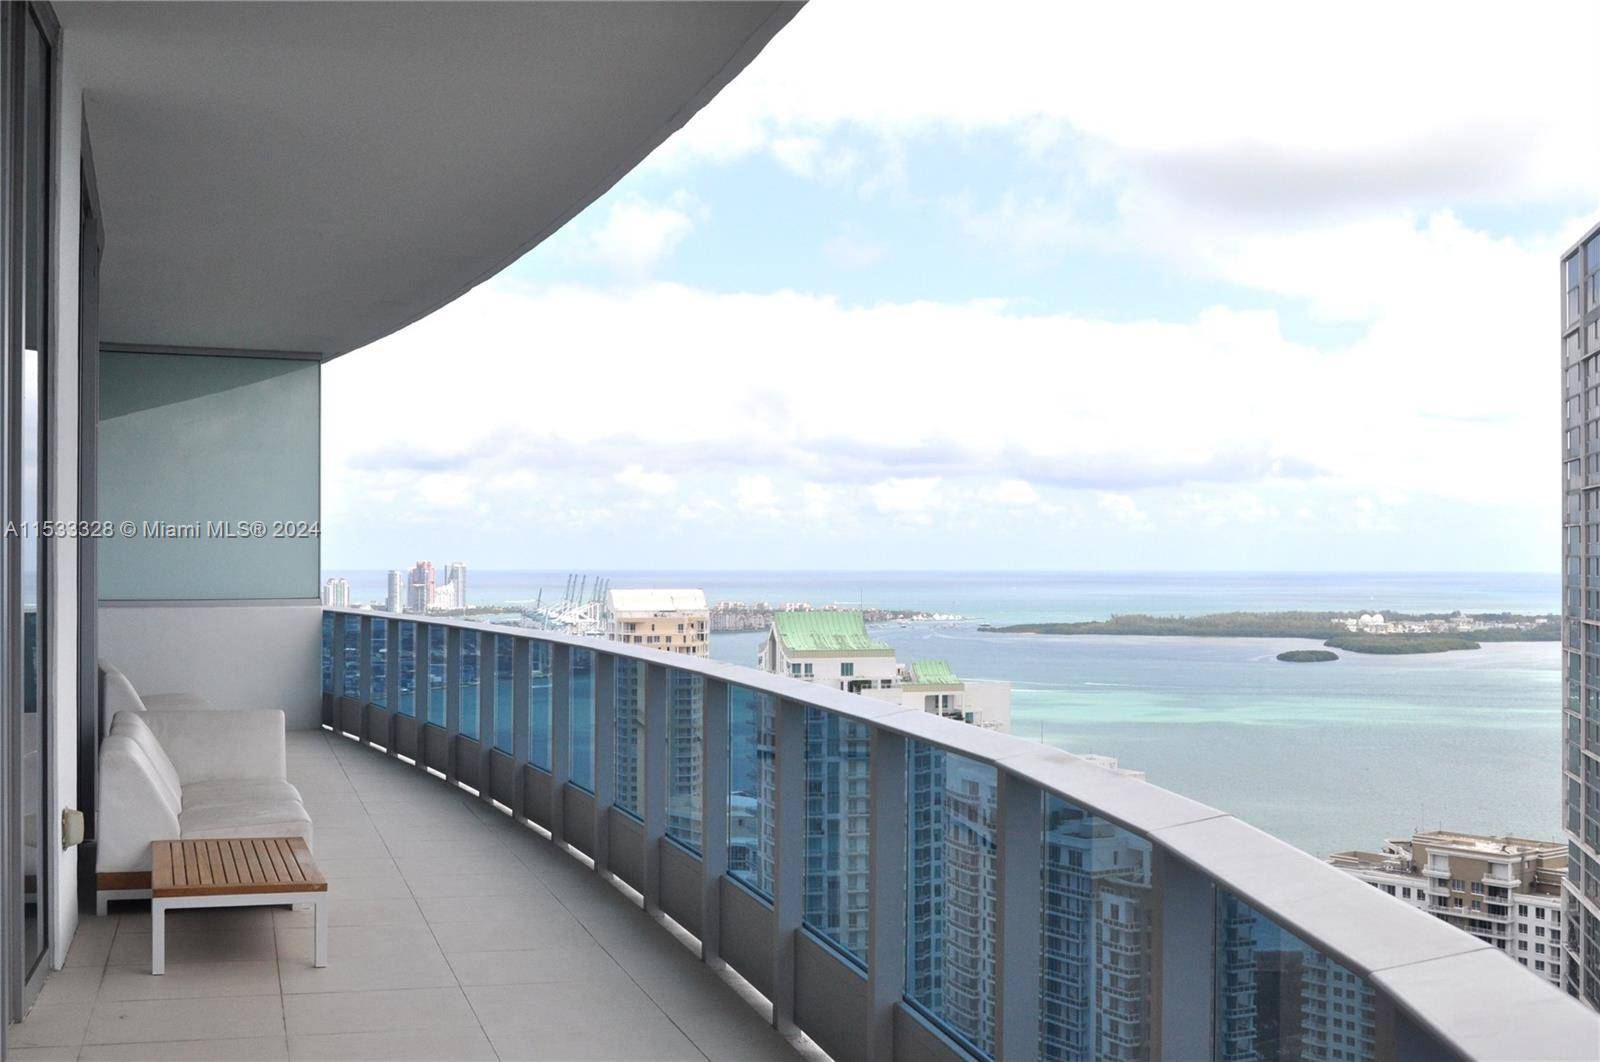 Stunning contemporary lower penthouse unit with soaring high ceilings, nestled in the heart of Brickell, Miami's vibrant epicenter.